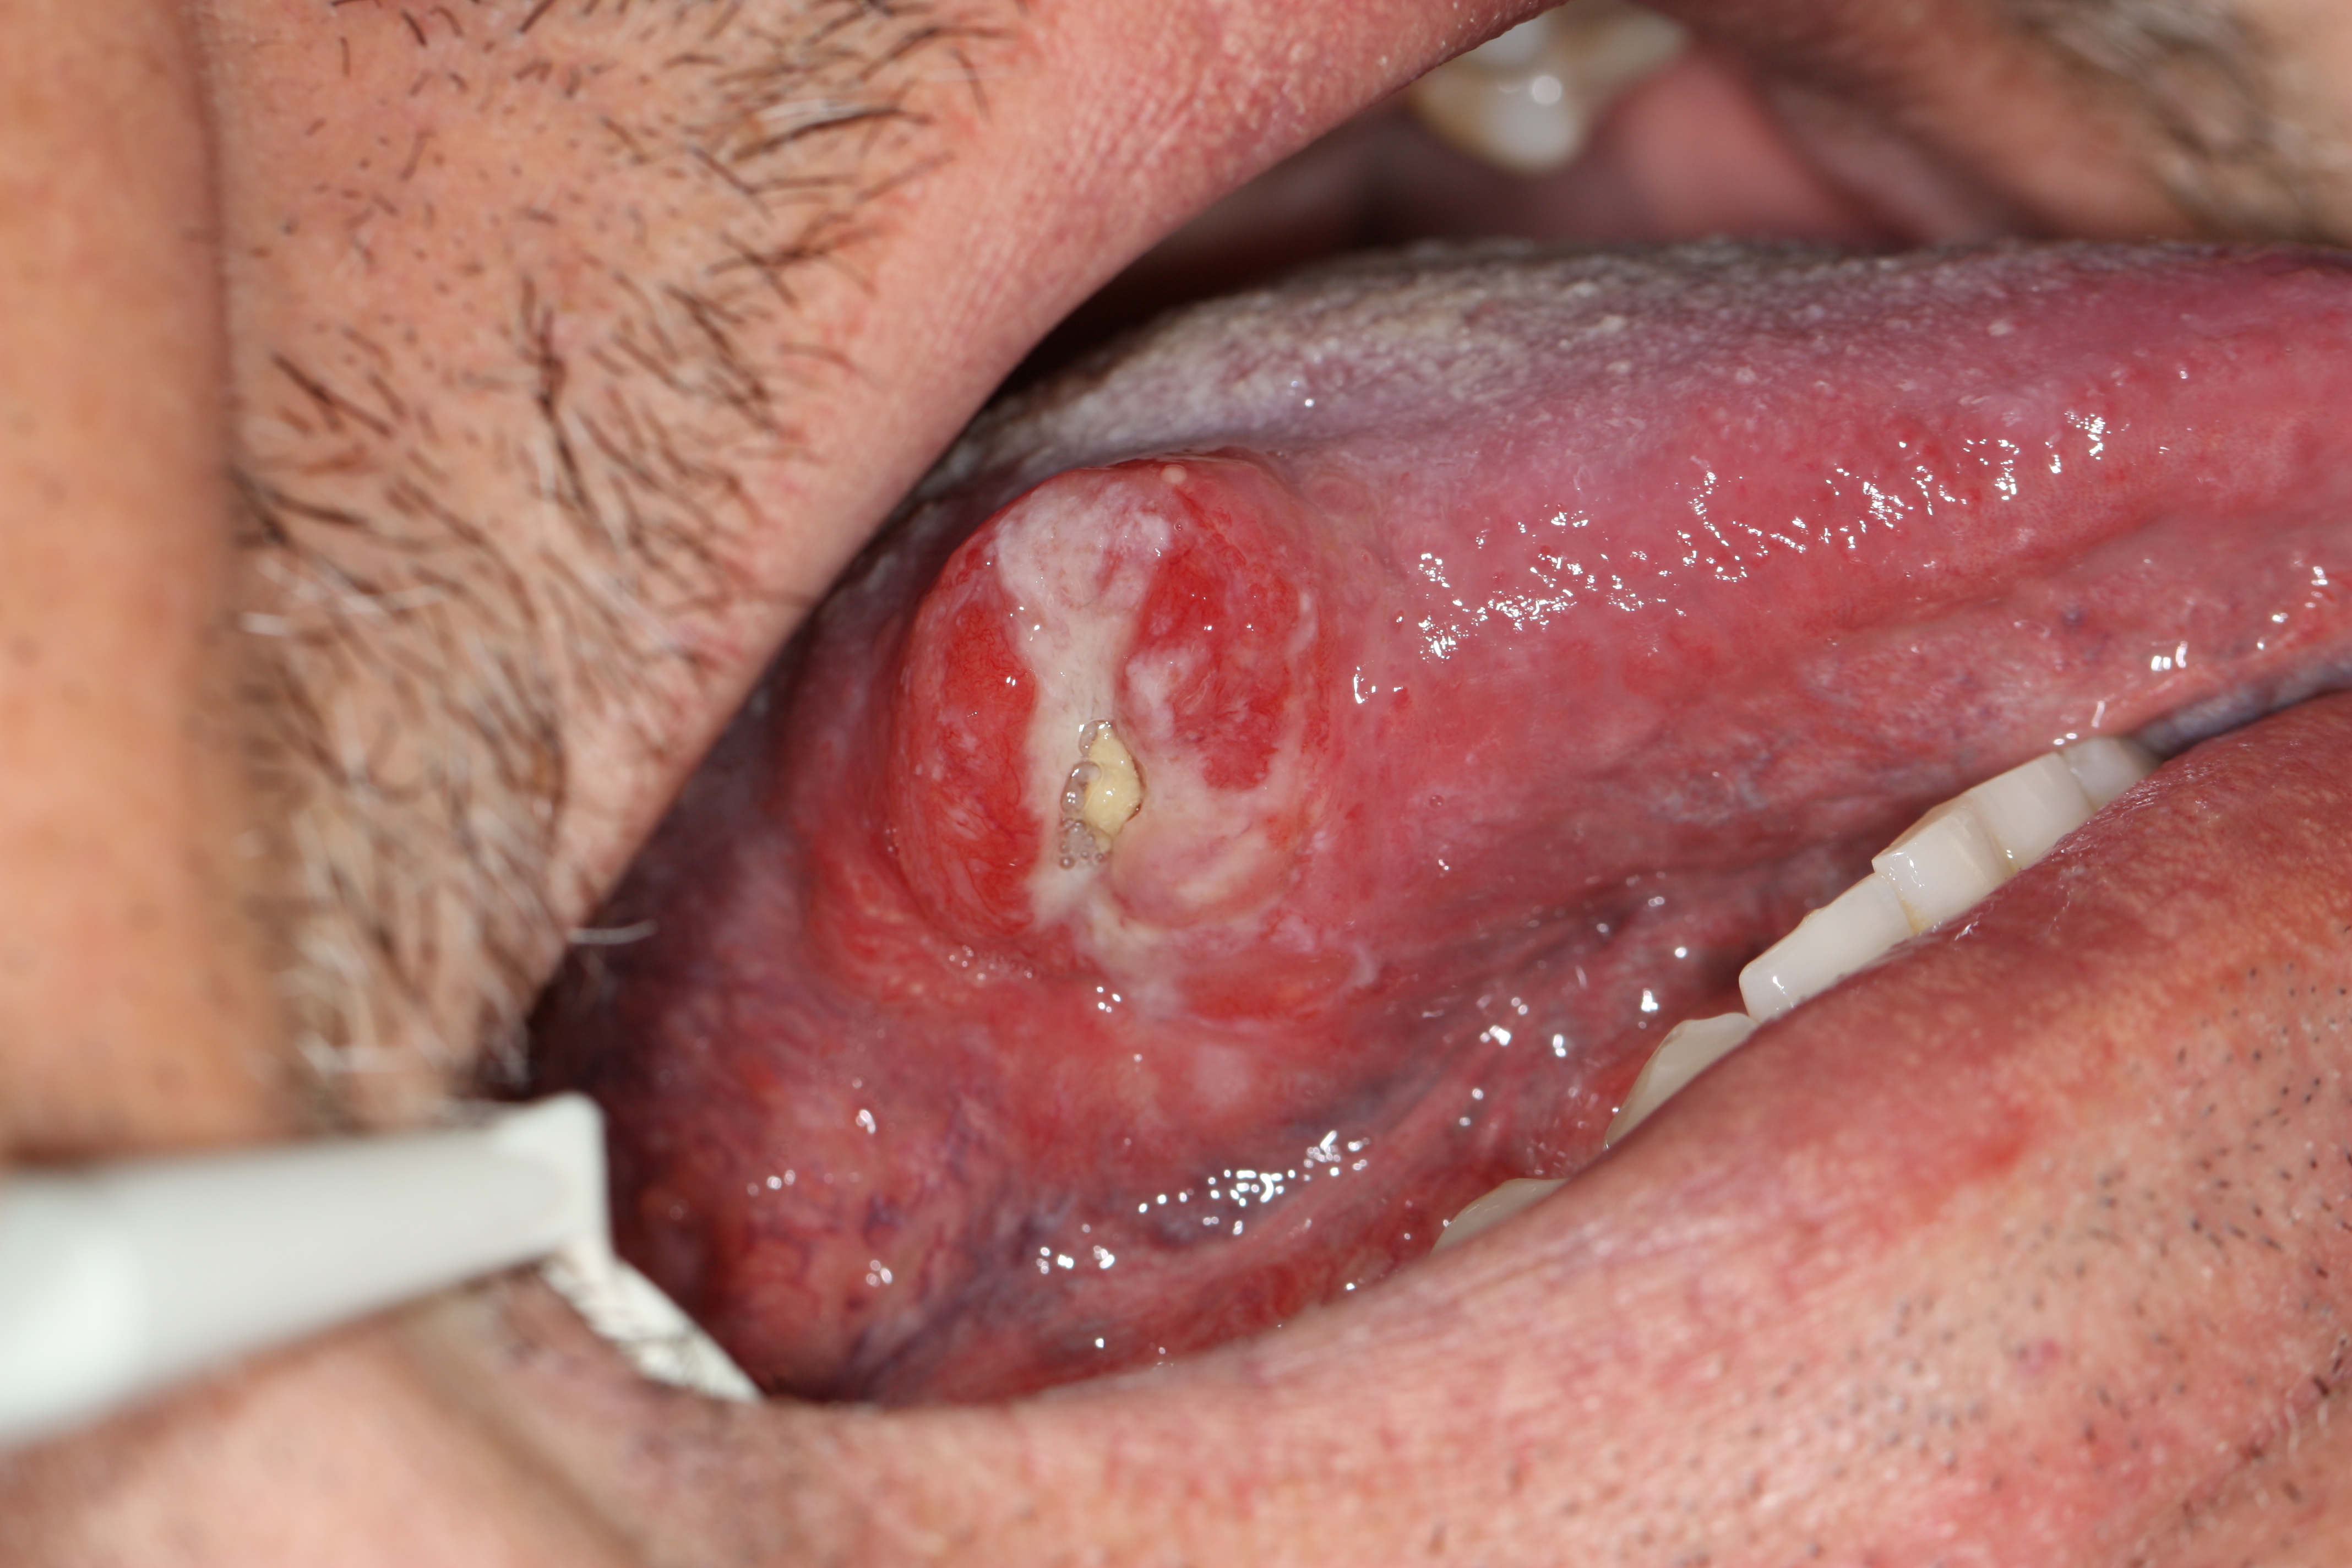 Pictures of oral cancer palate — pic 4